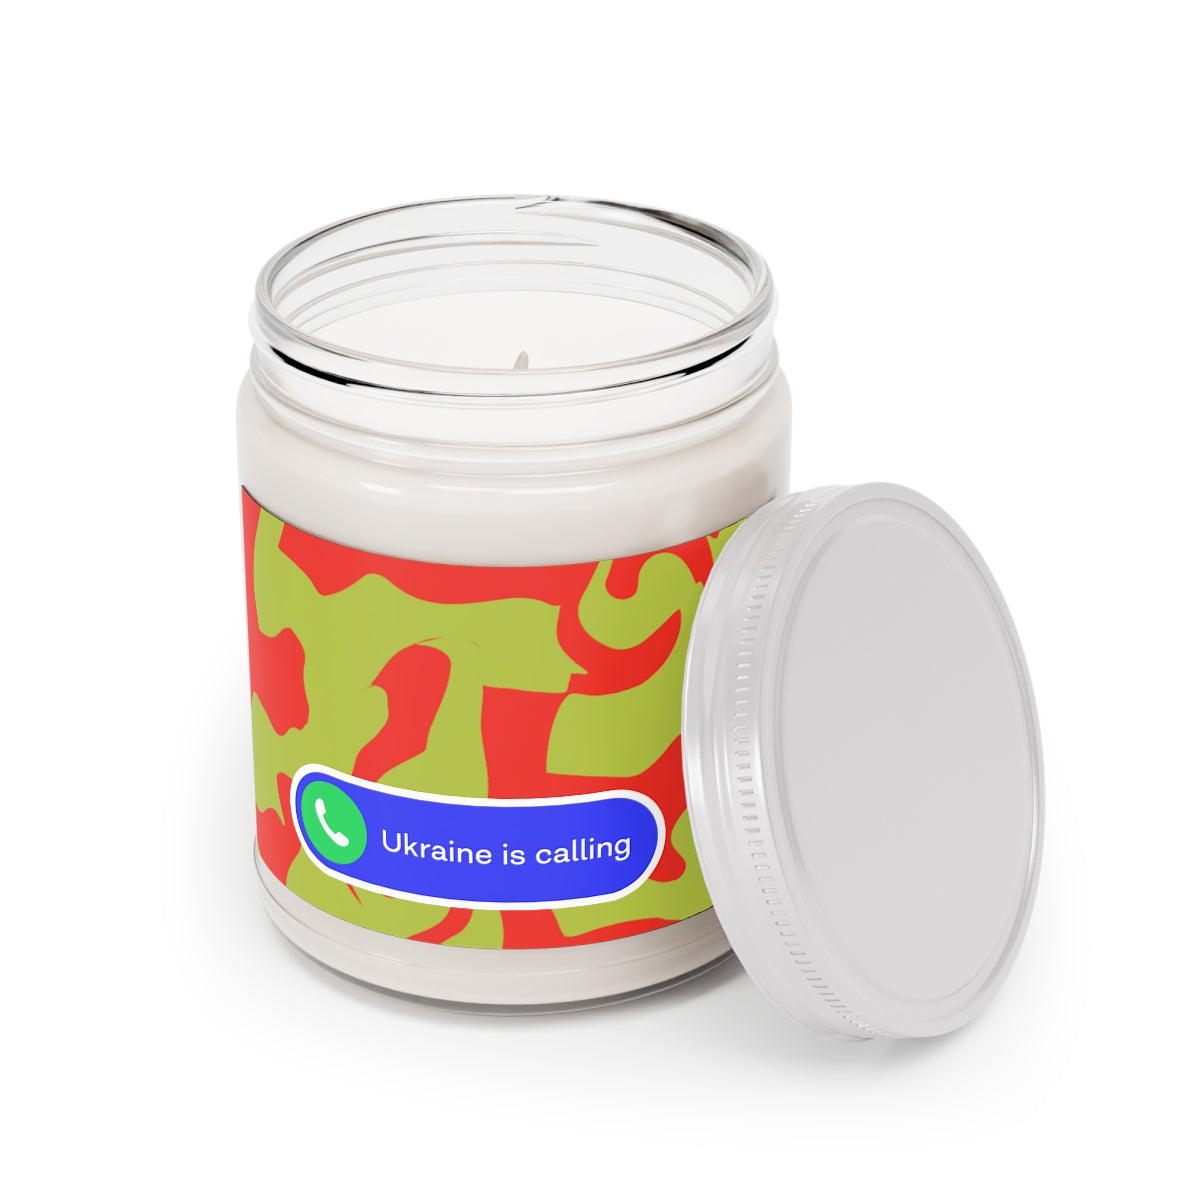 Hypno - 100% Ecological Soy Wax Scented Candle (lasts 50-60h)